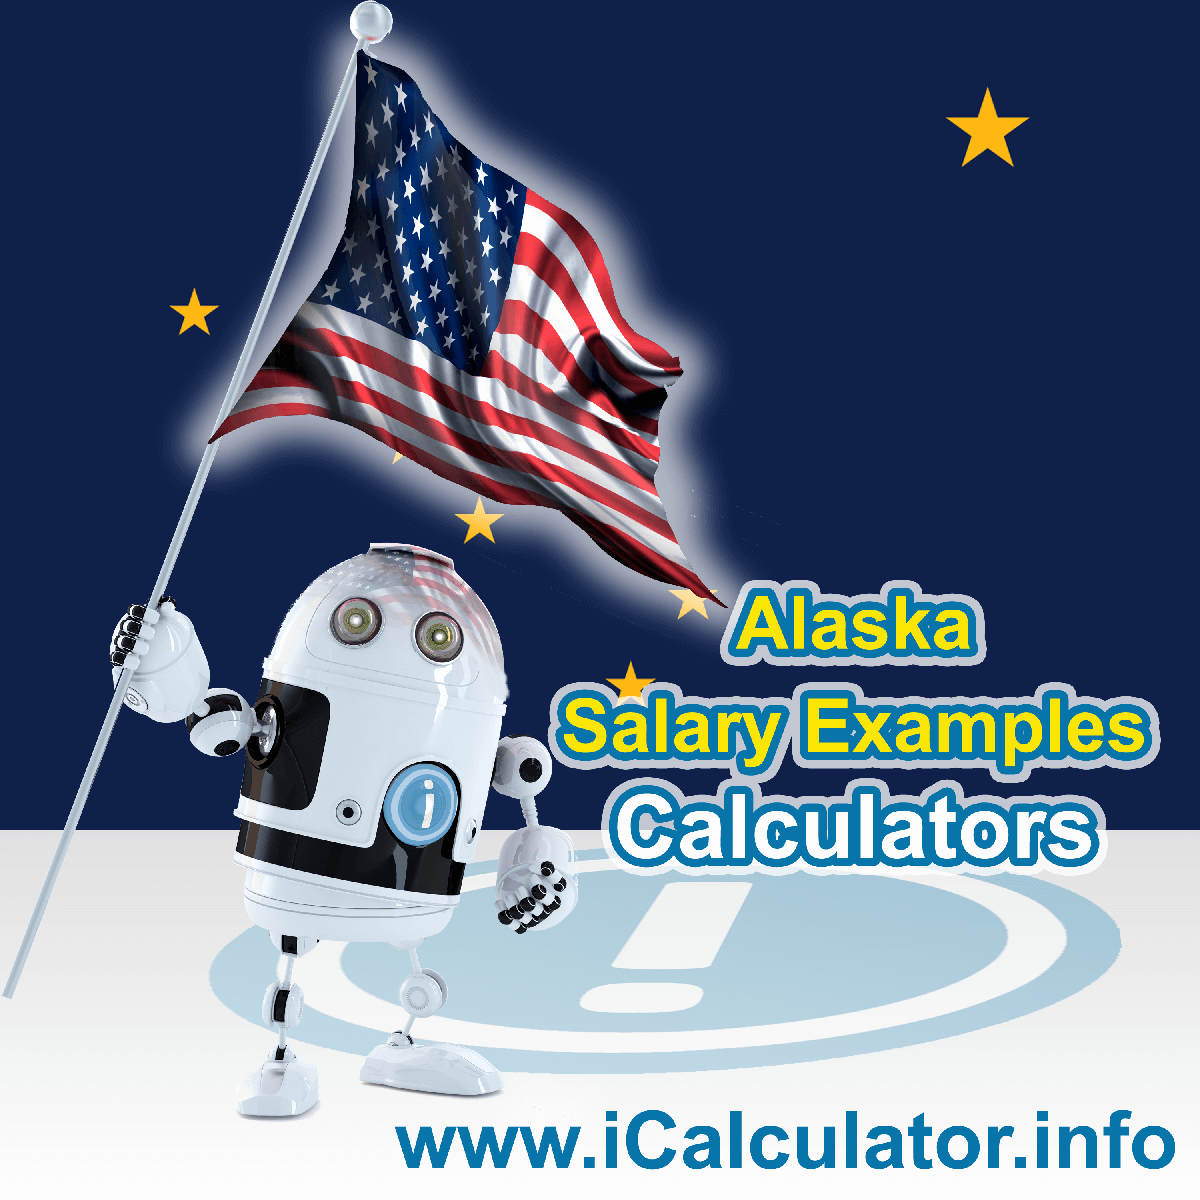 Alaska Salary Example for $ 25,000.00 in 2023 | iCalculator™ | $ 25,000.00 salary example for employee and employer paying Alaska State tincome taxes. Detailed salary after tax calculation including Alaska State Tax, Federal State Tax, Medicare Deductions, Social Security, Capital Gains and other income tax and salary deductions complete with supporting Alaska state tax tables 